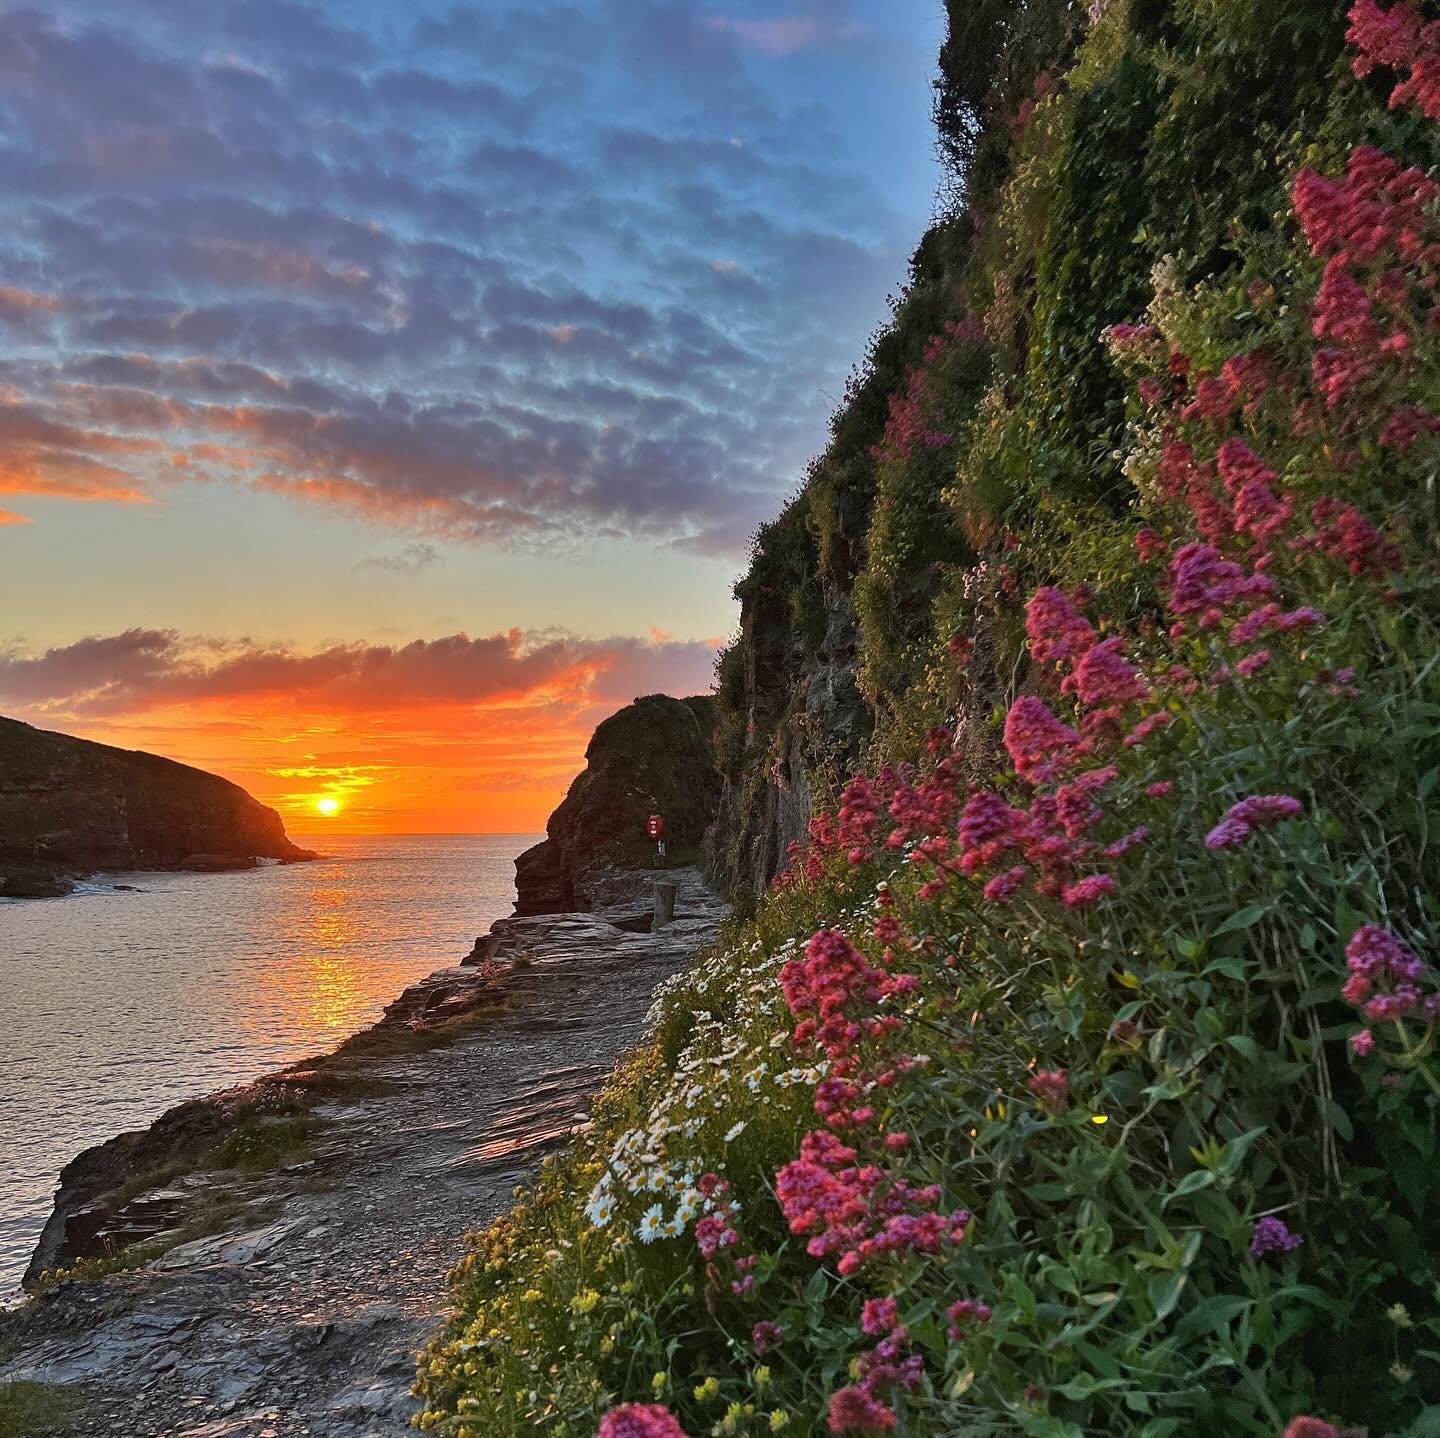 So many wildflowers everywhere we went! I love coastal edges, especially when they include a sunset #cornwall